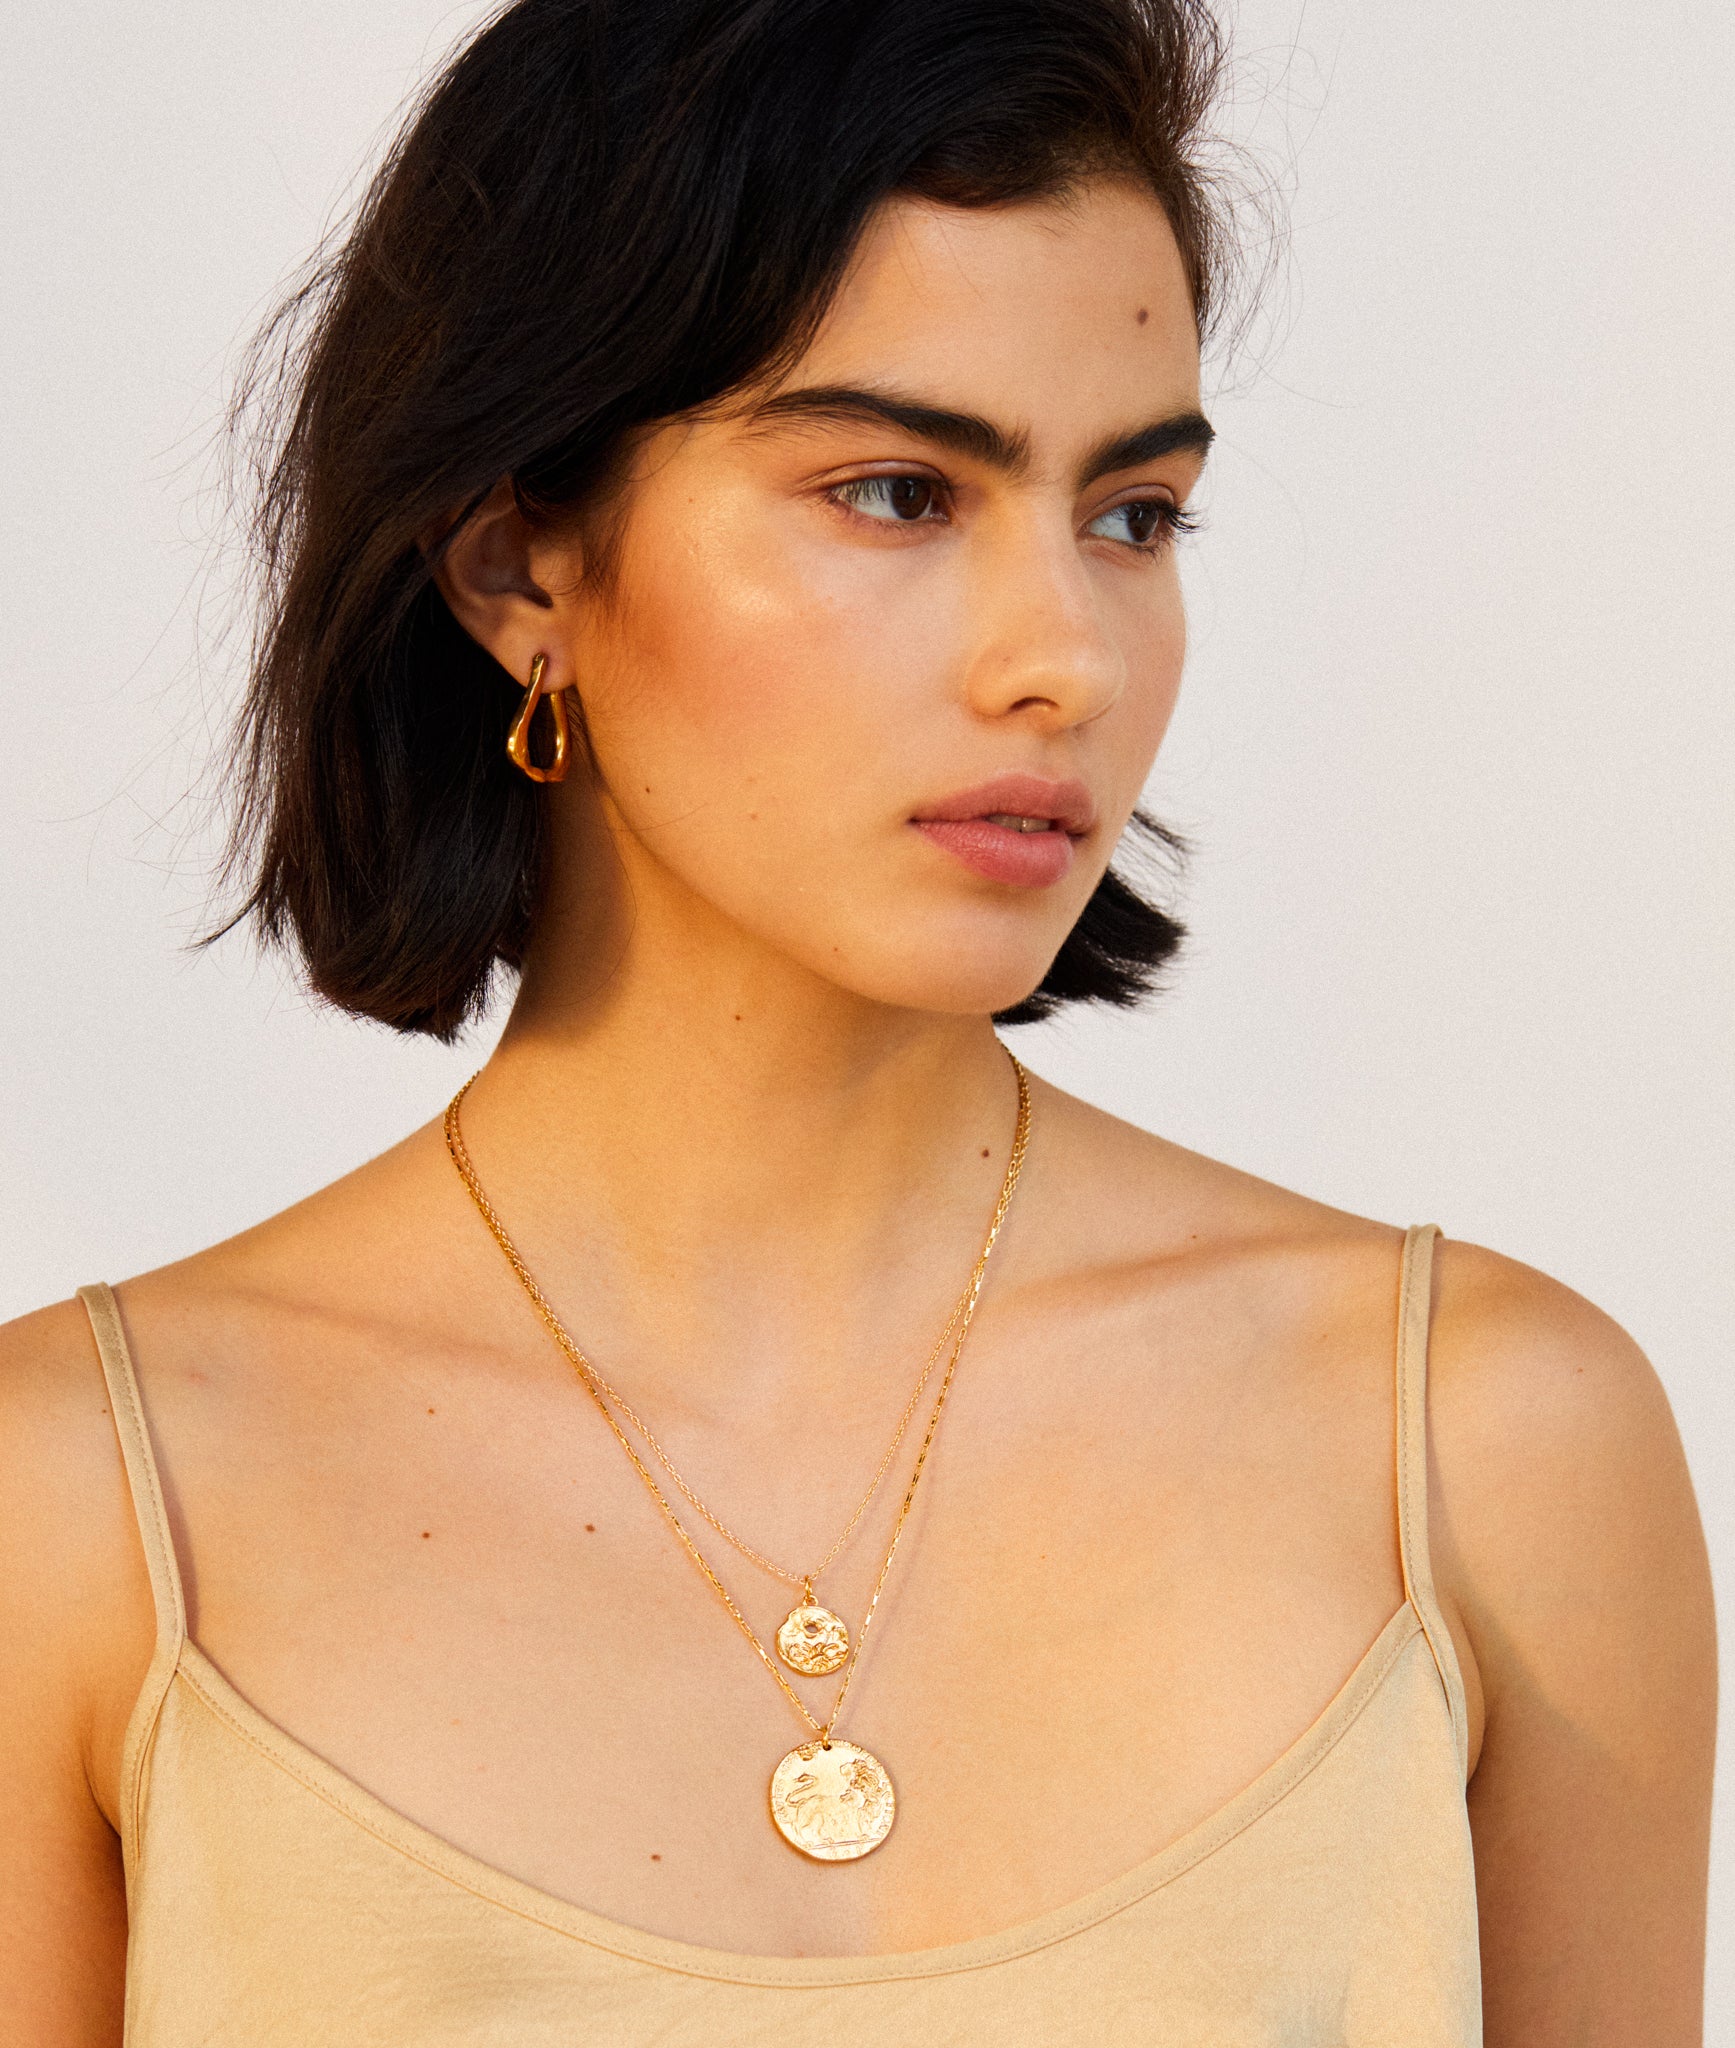 model wearing Alighieri Gold Plated Scorpio Zodiac Necklace Medallion layering necklaces